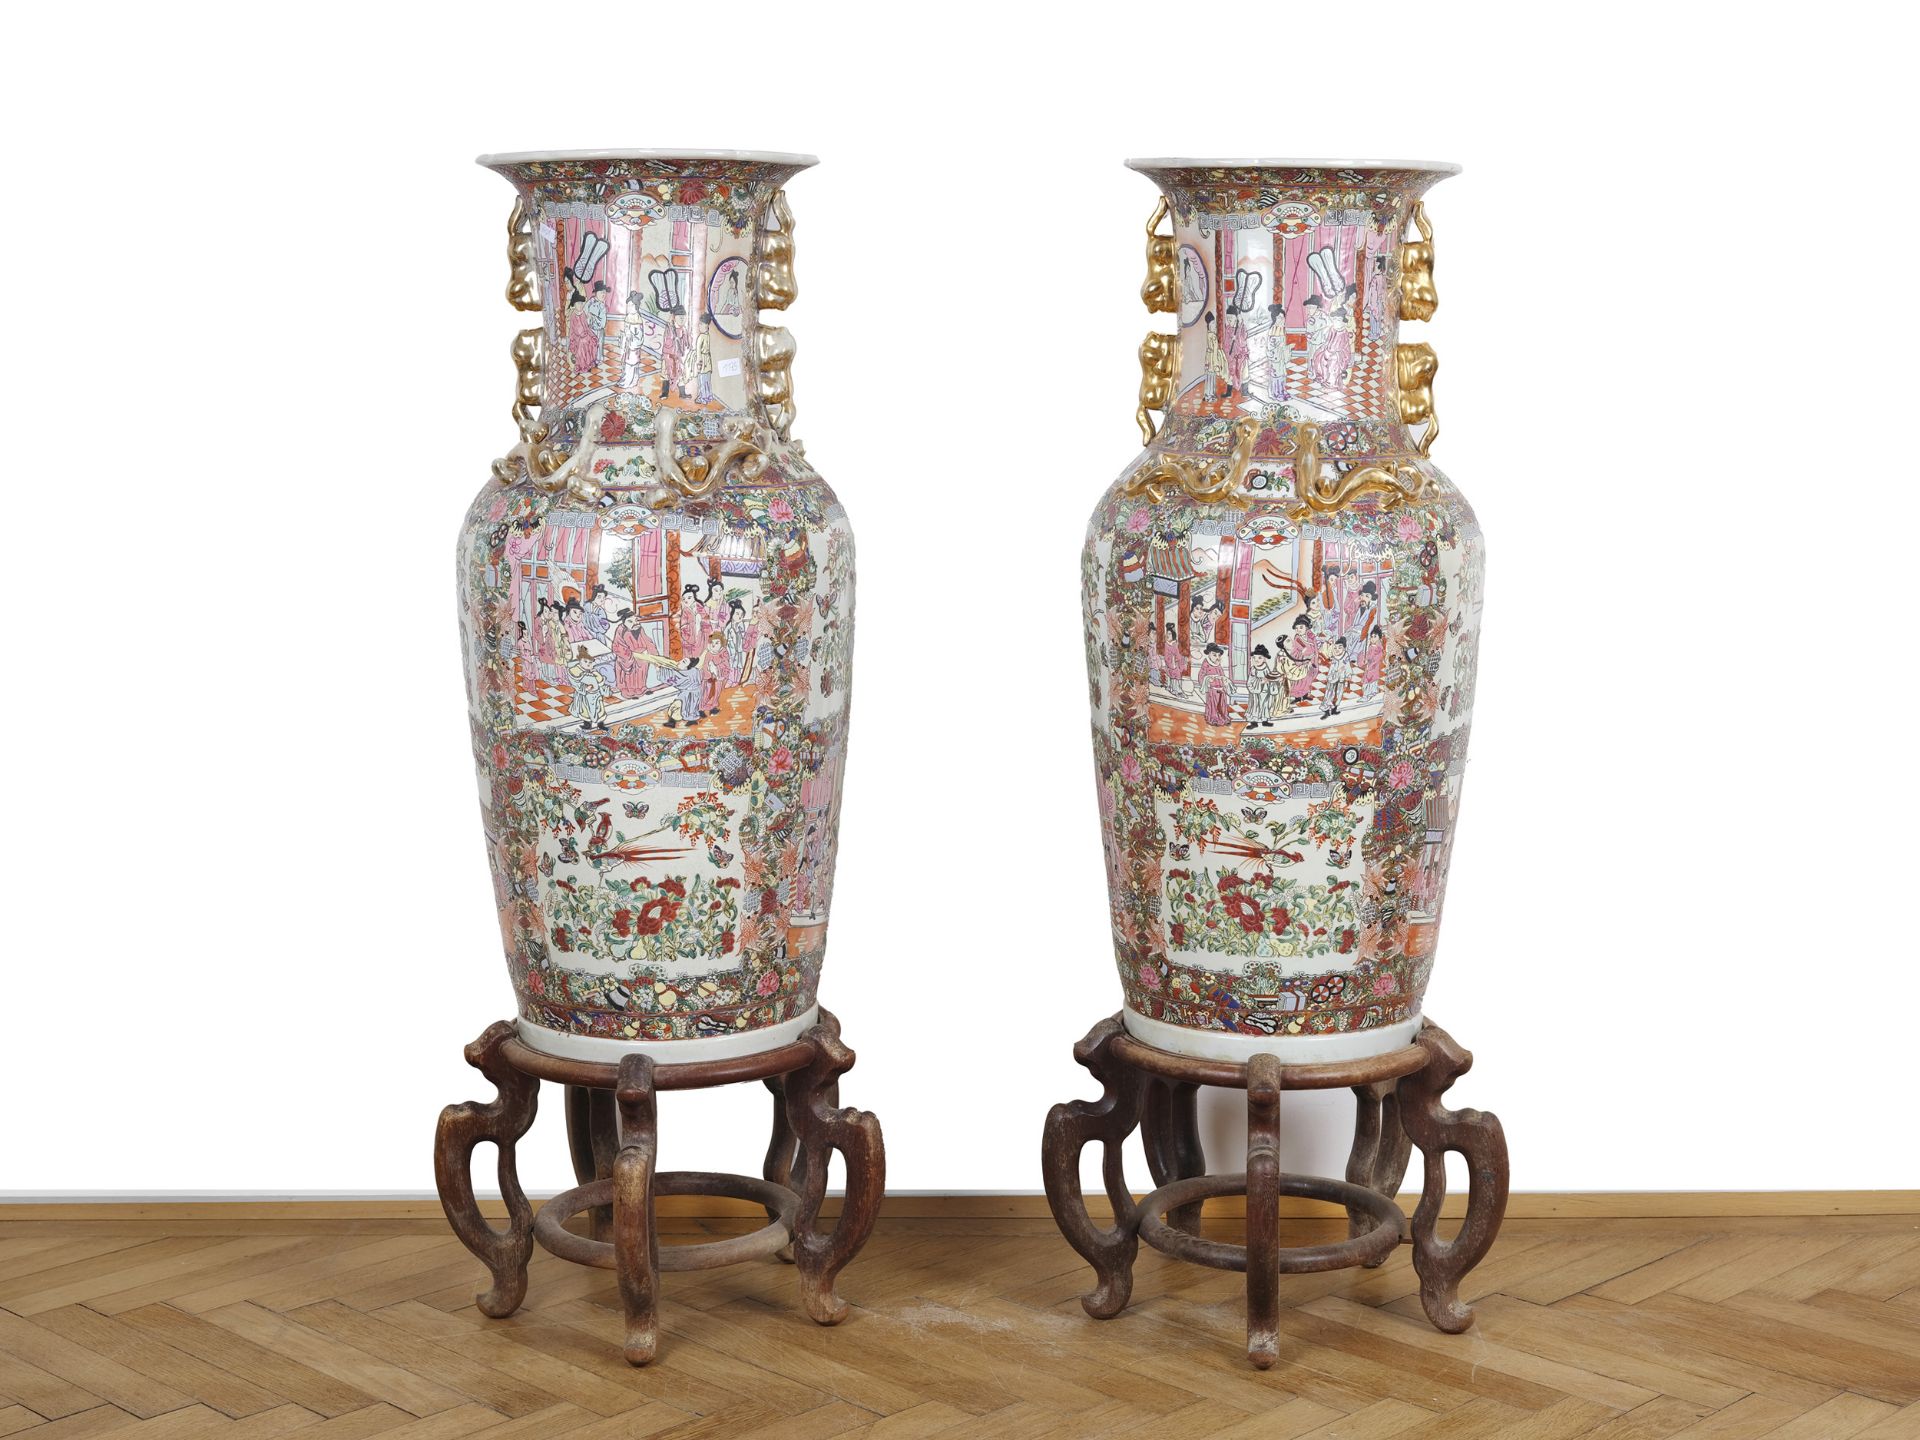 Pair of vases with wooden base, China - Image 4 of 5